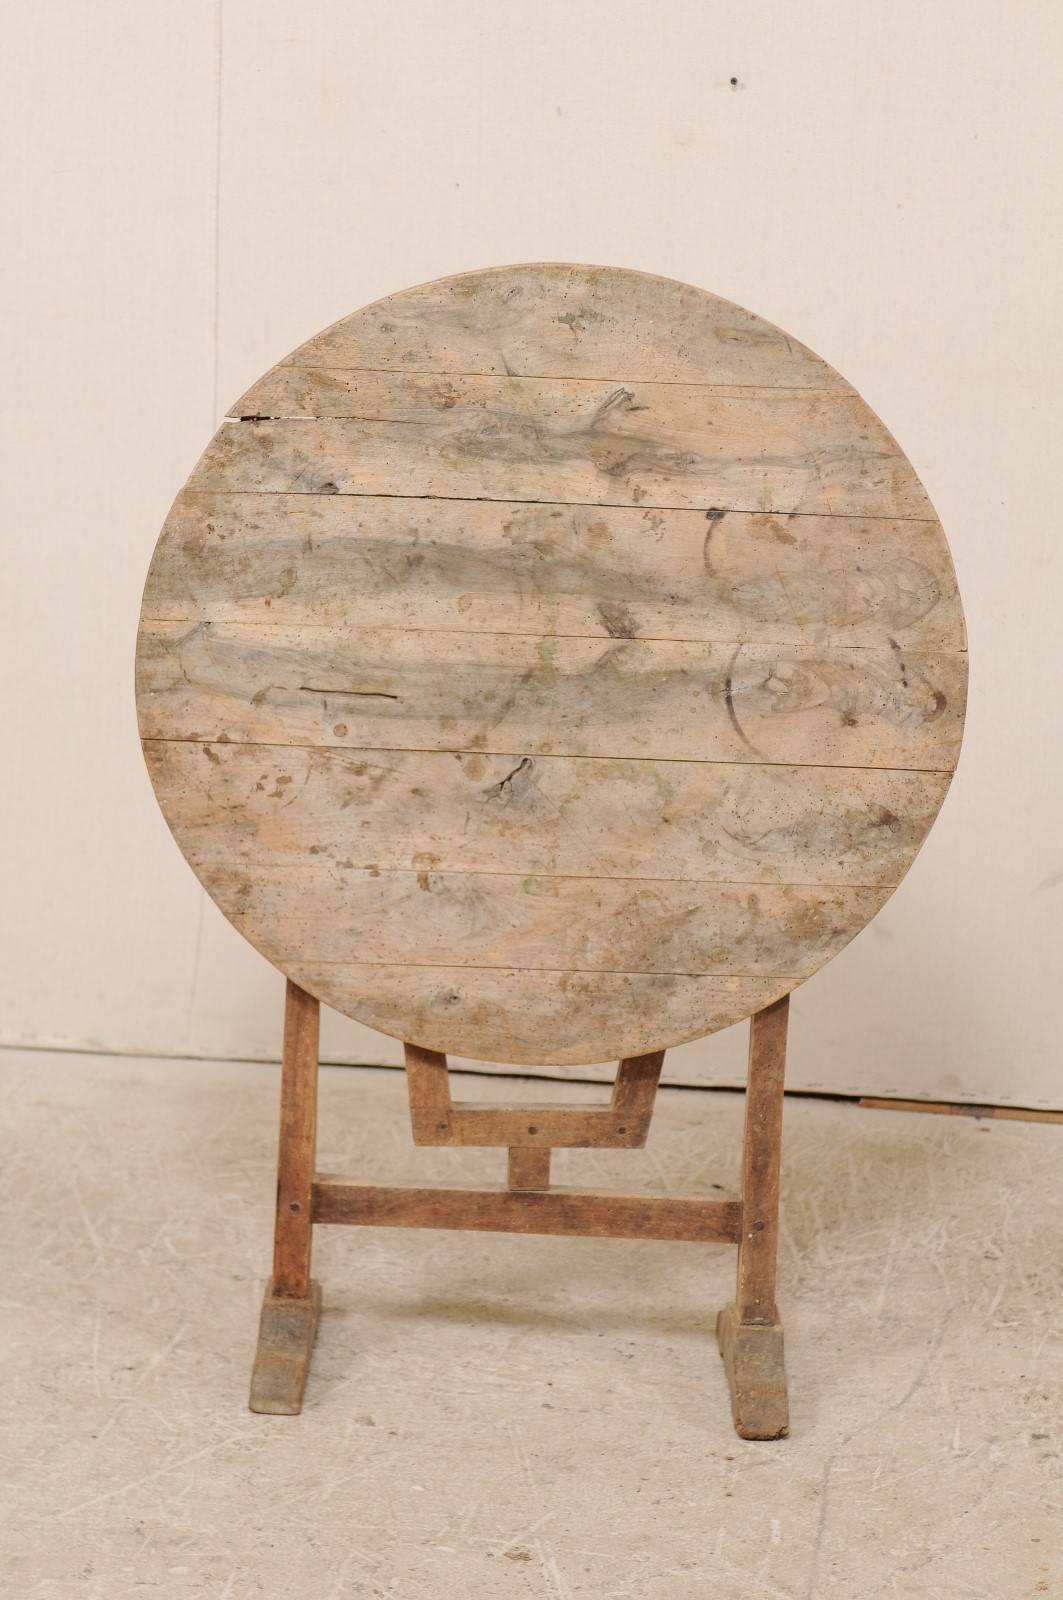 A French 20th century wine tasting table. This round shaped French wine tasting table has a natural wood finish with the typical tilt top, and butterfly wedge support. This smaller sized French wine tasting table would work well in a wine cellar or